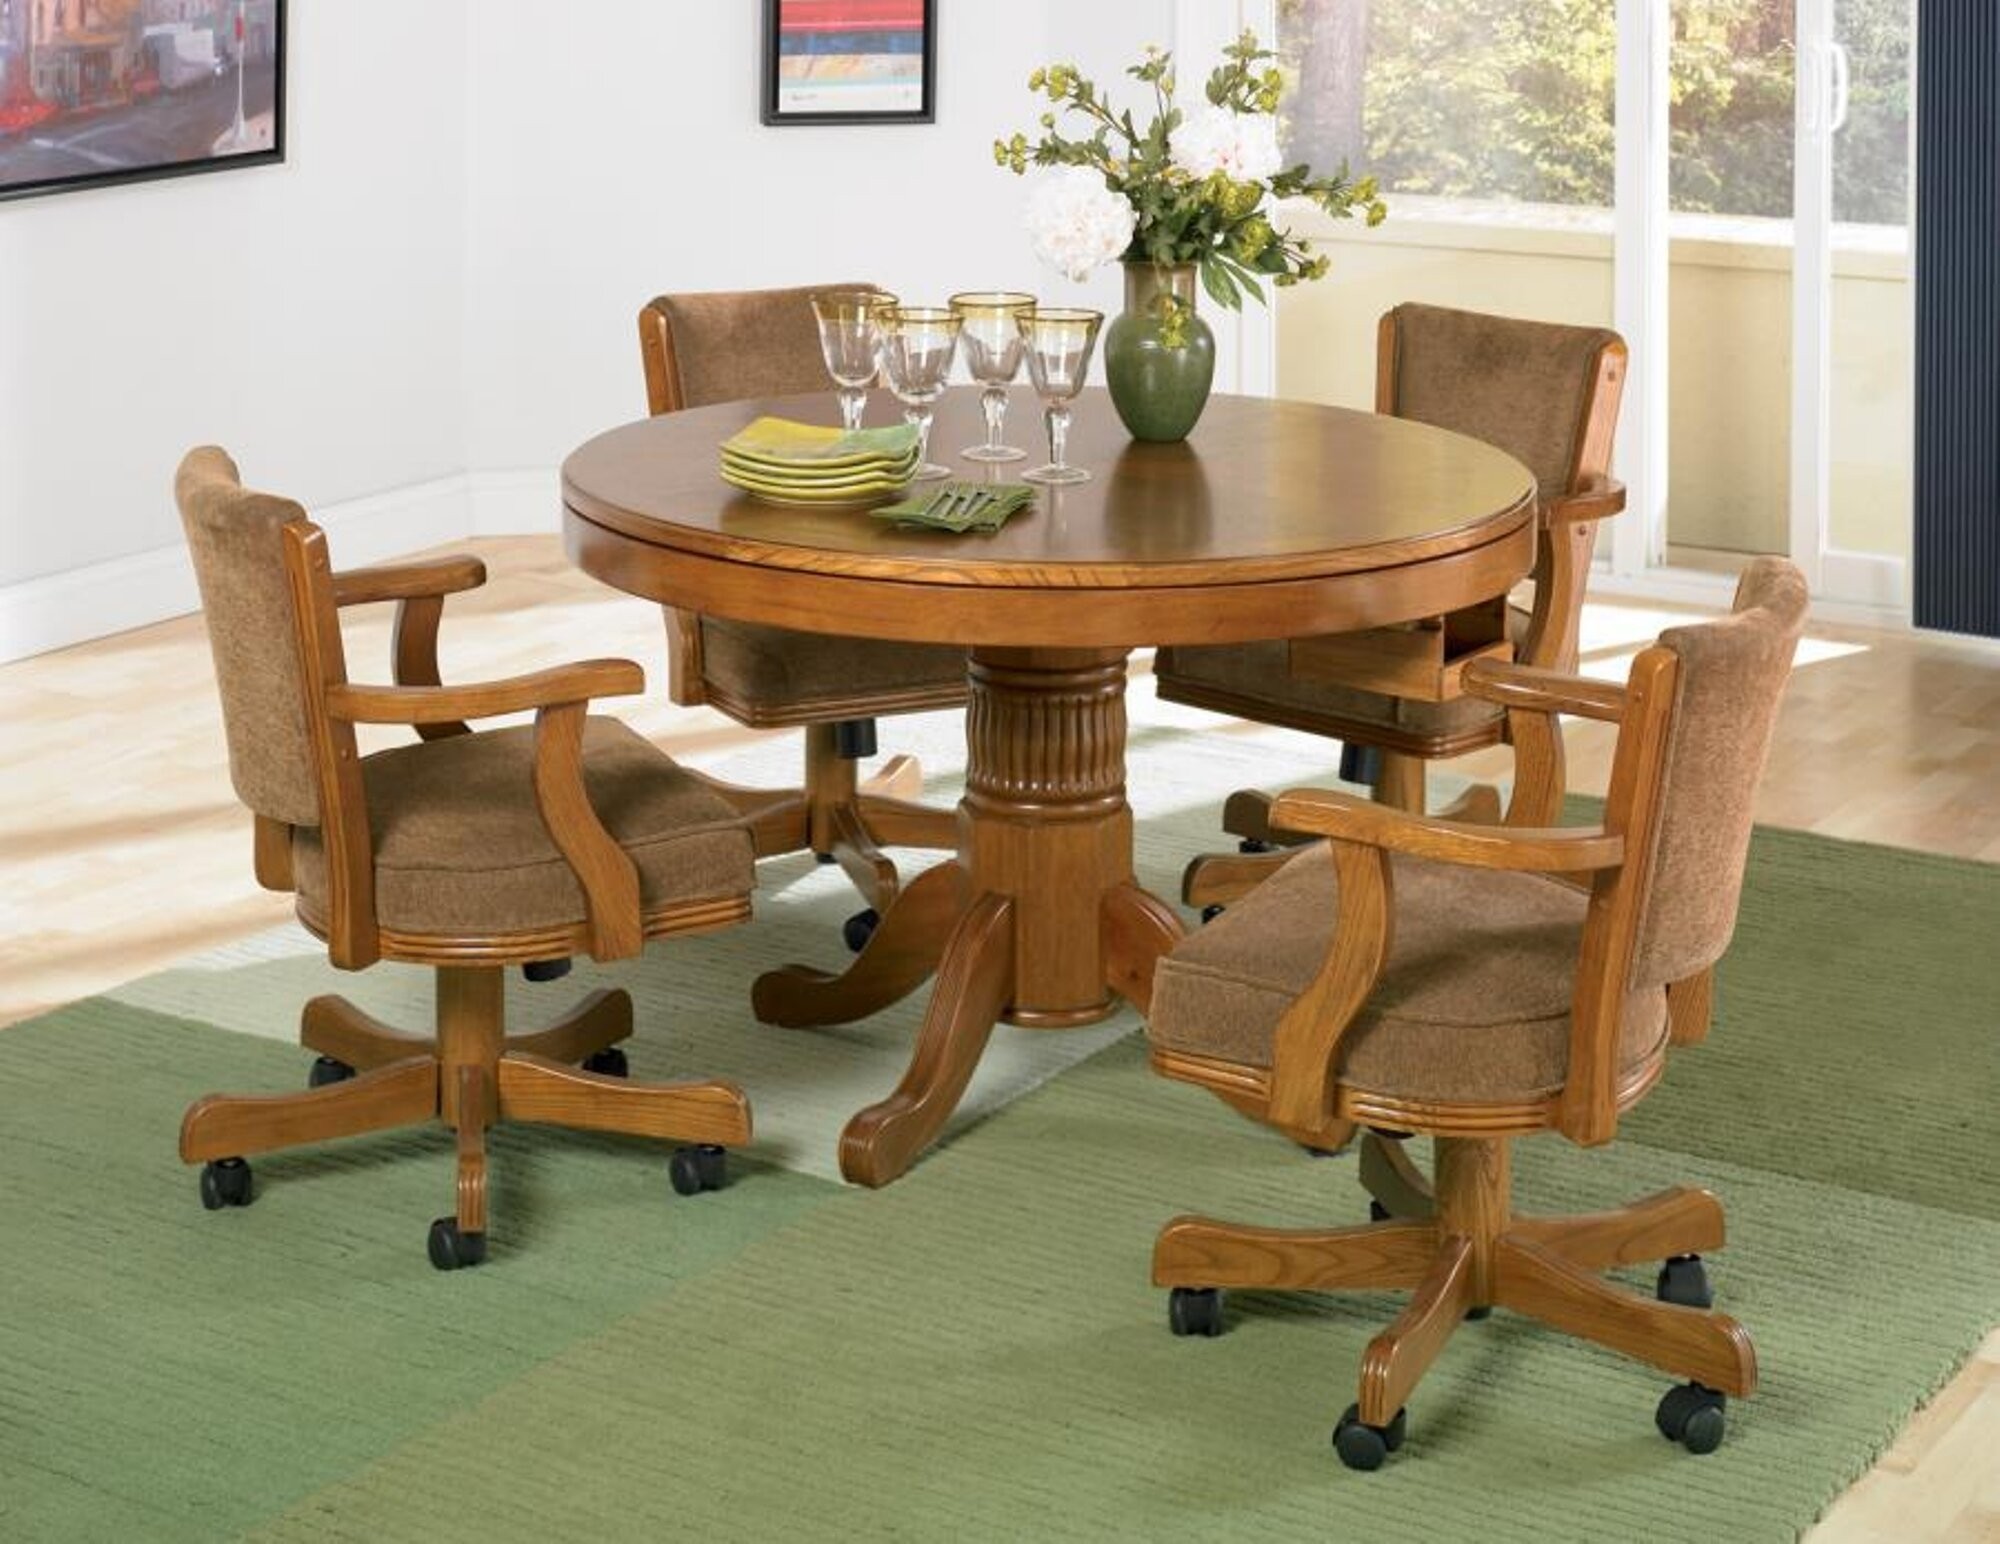 5pc 3-in-1 Game Dining Table & Chairs Set Oak Finish